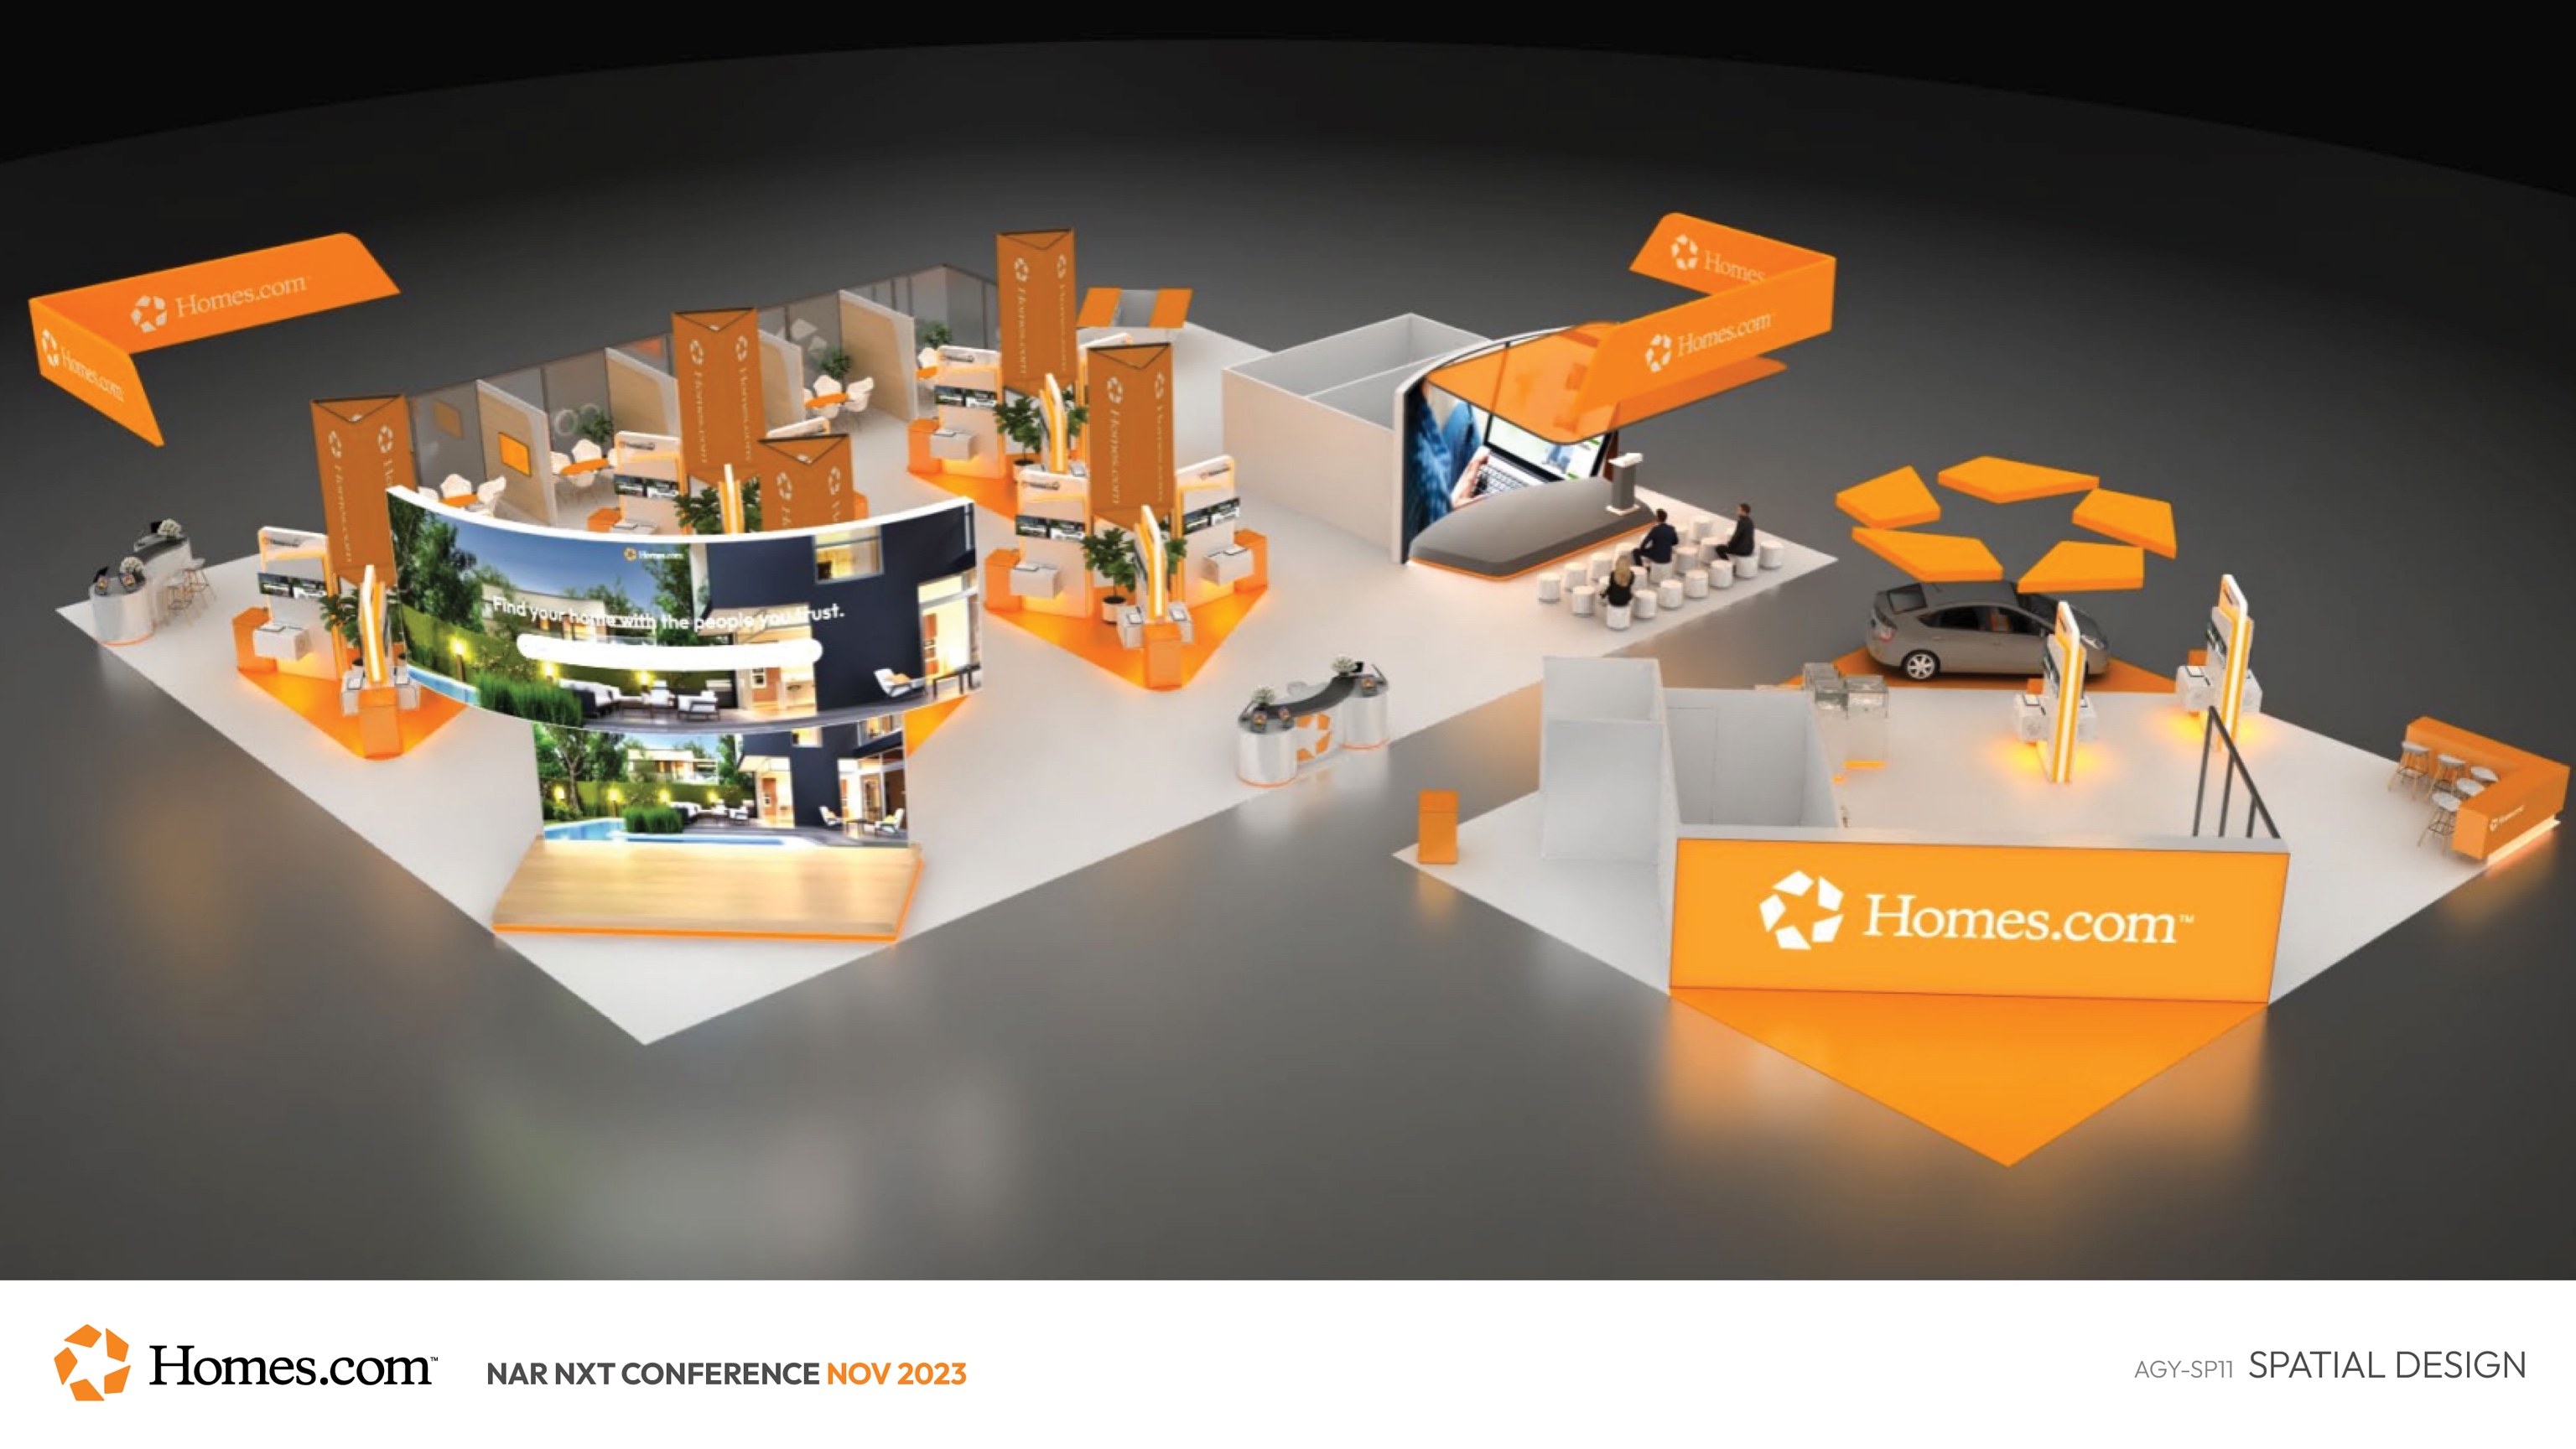 Homes.com – NAR Conference Exhibition